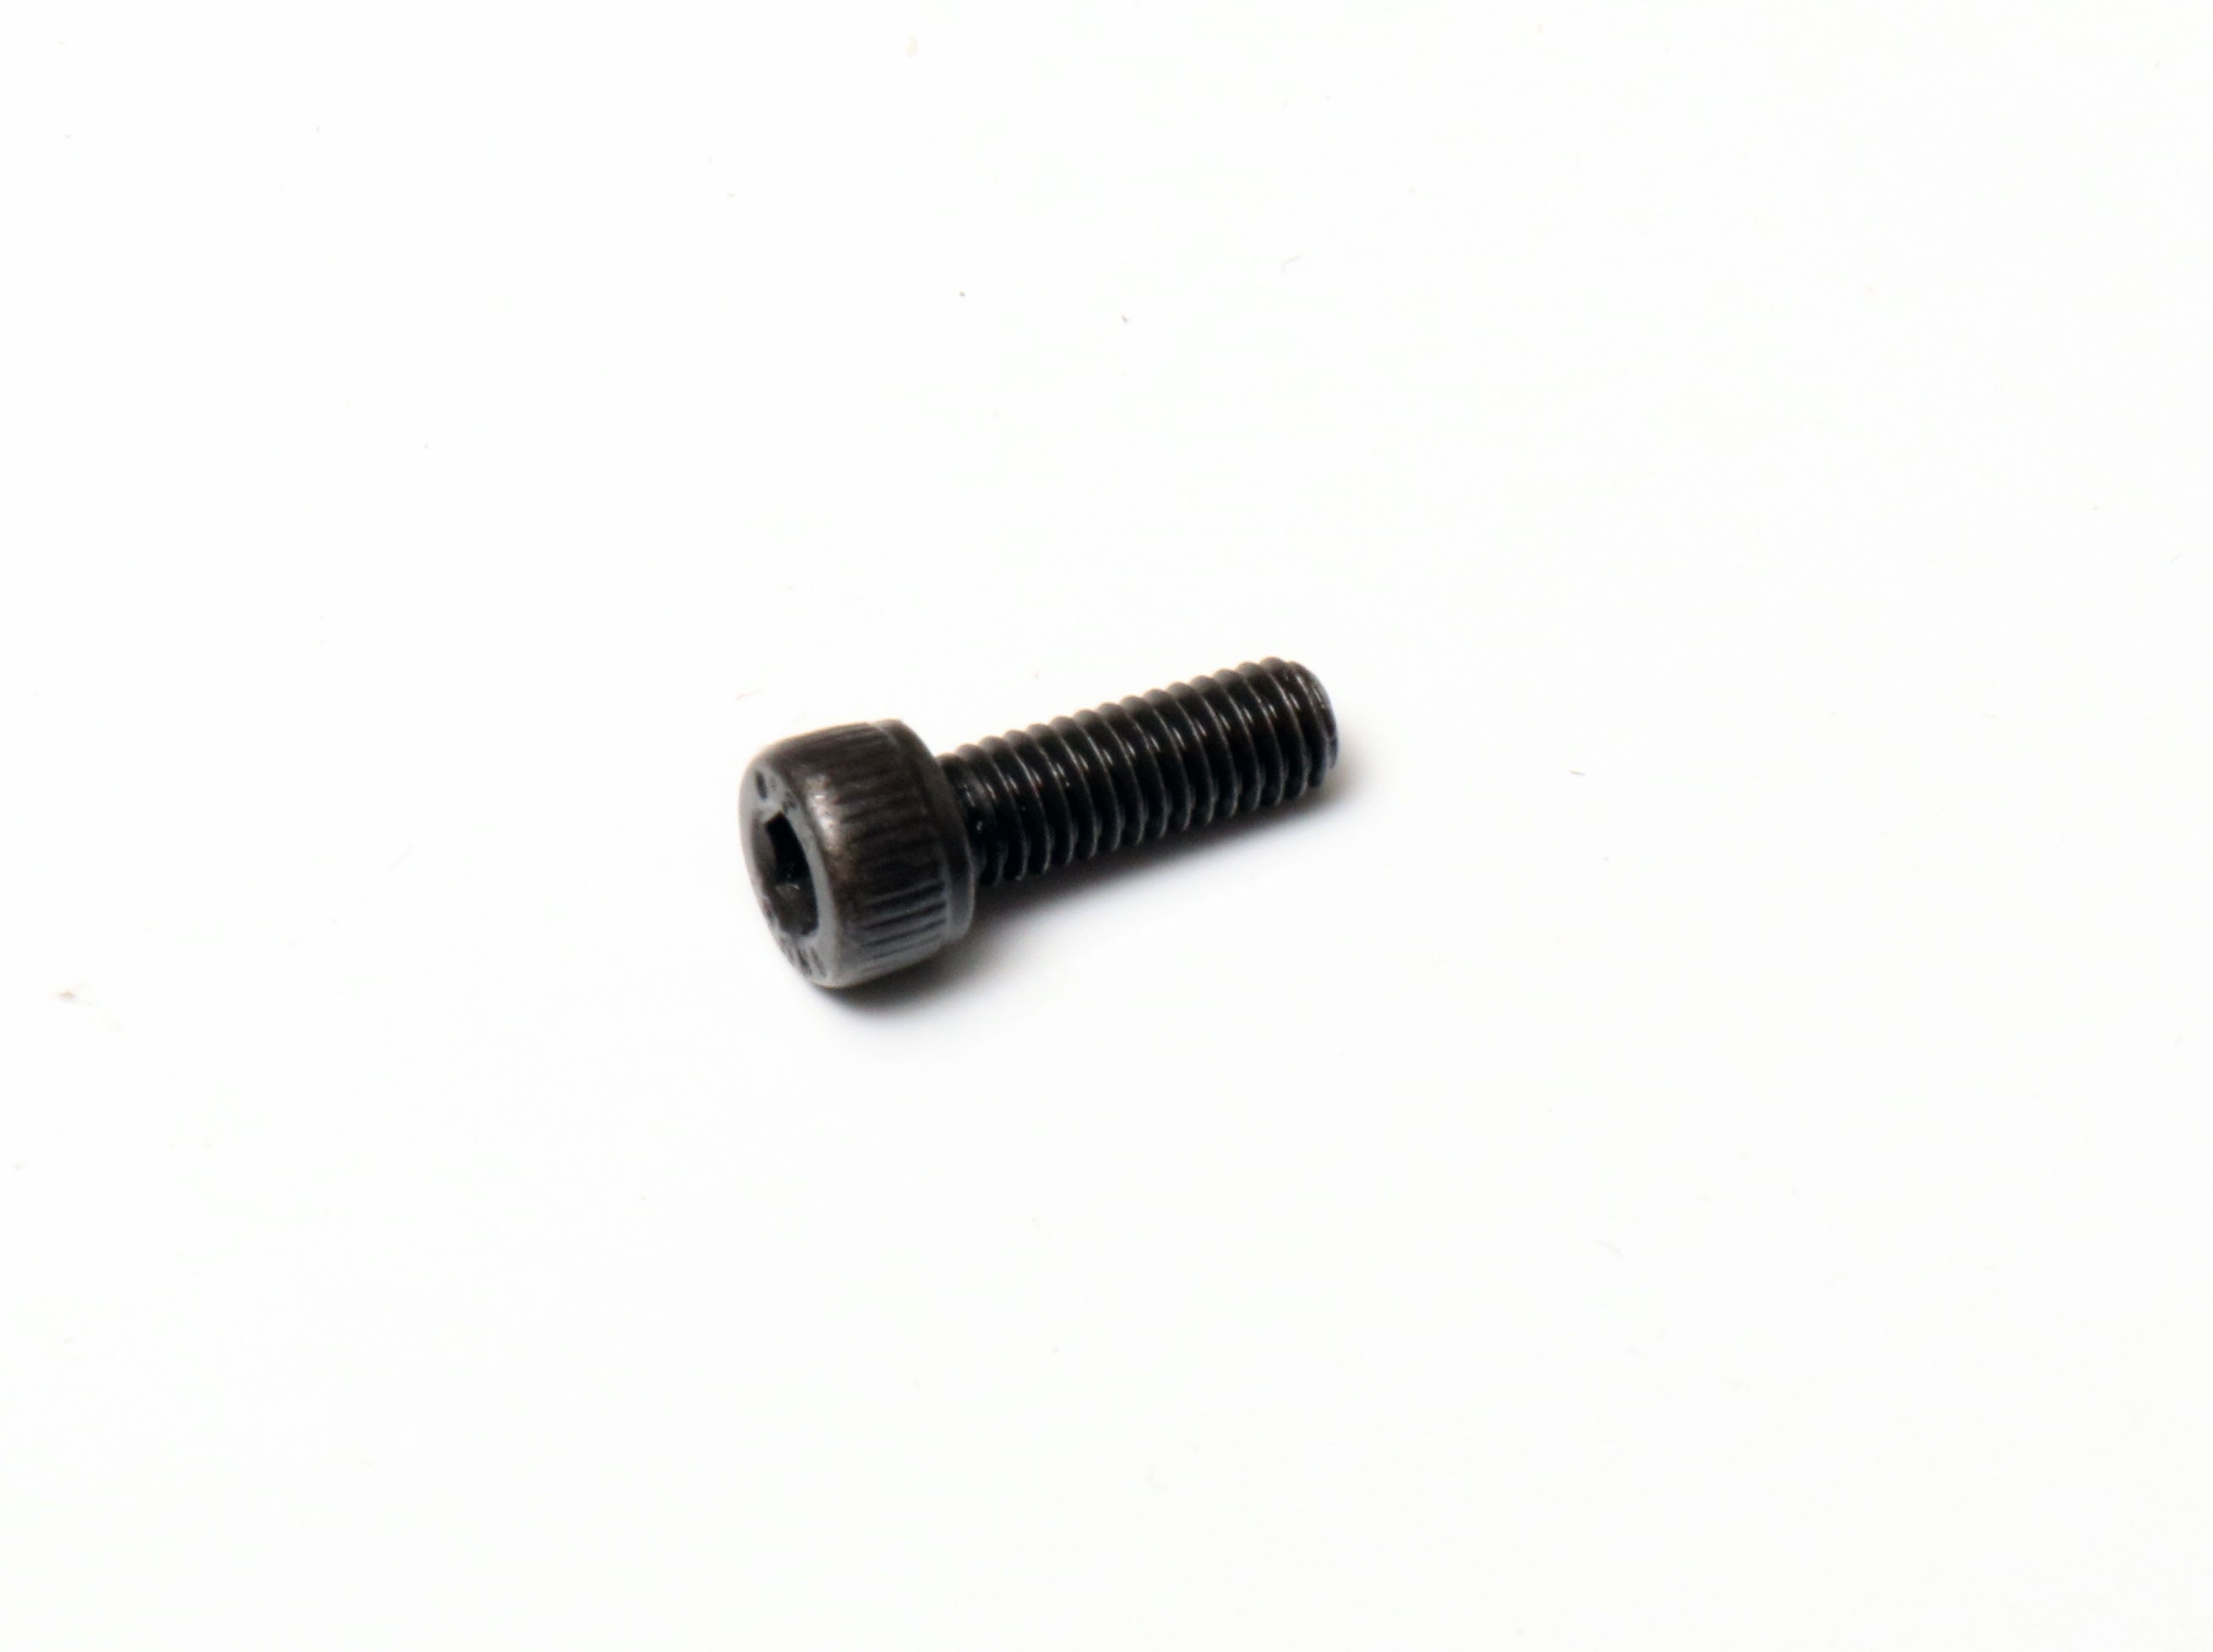 Fiala M4 20mm Bolt for Cylinder Heads